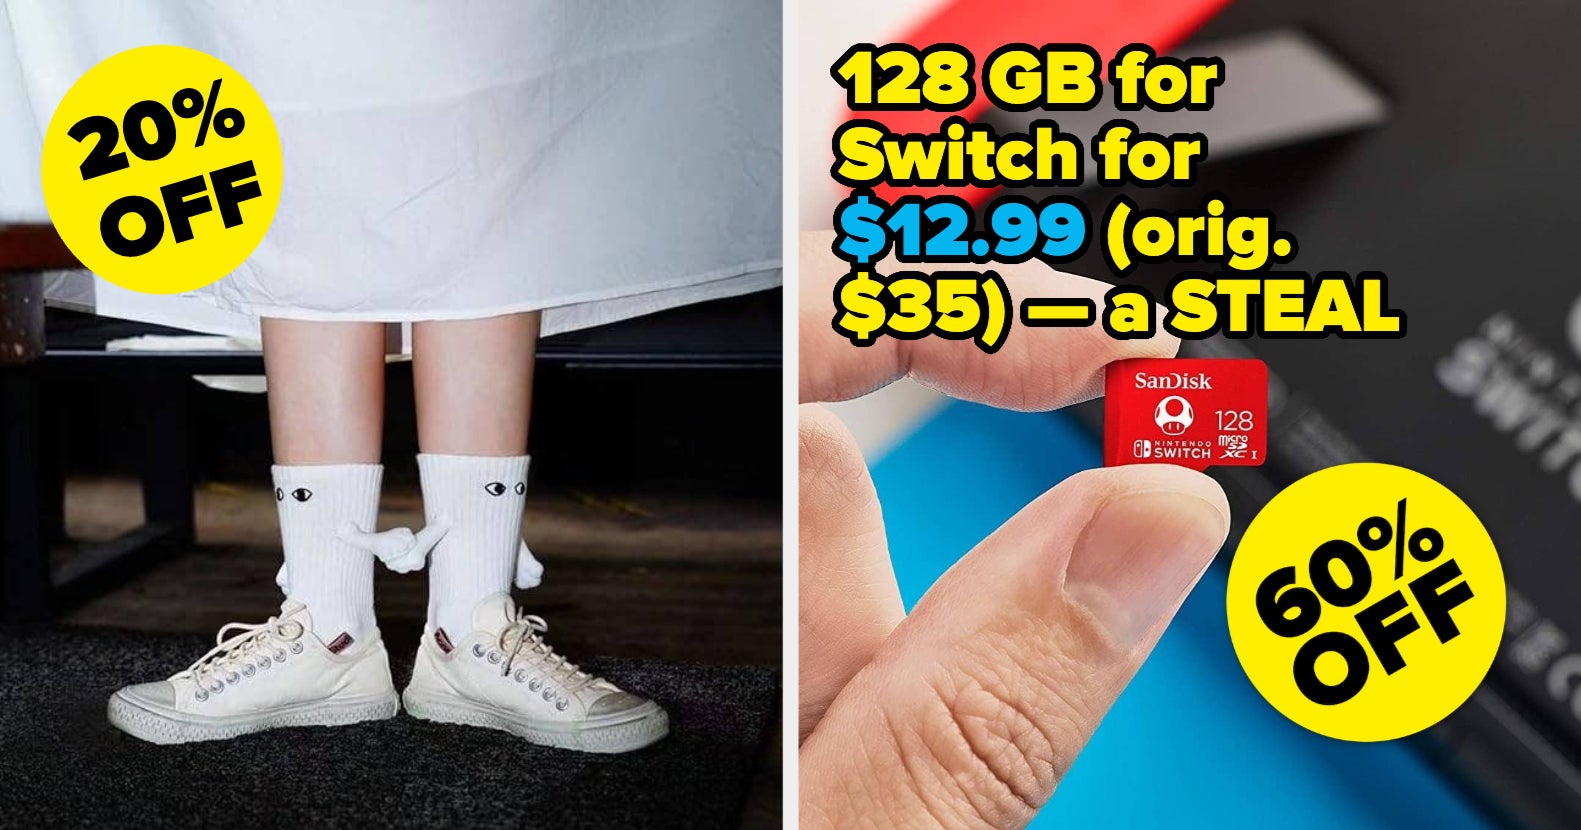 14 Cyber Week Deals Under $20 That Make the Perfect Stocking Stuffers